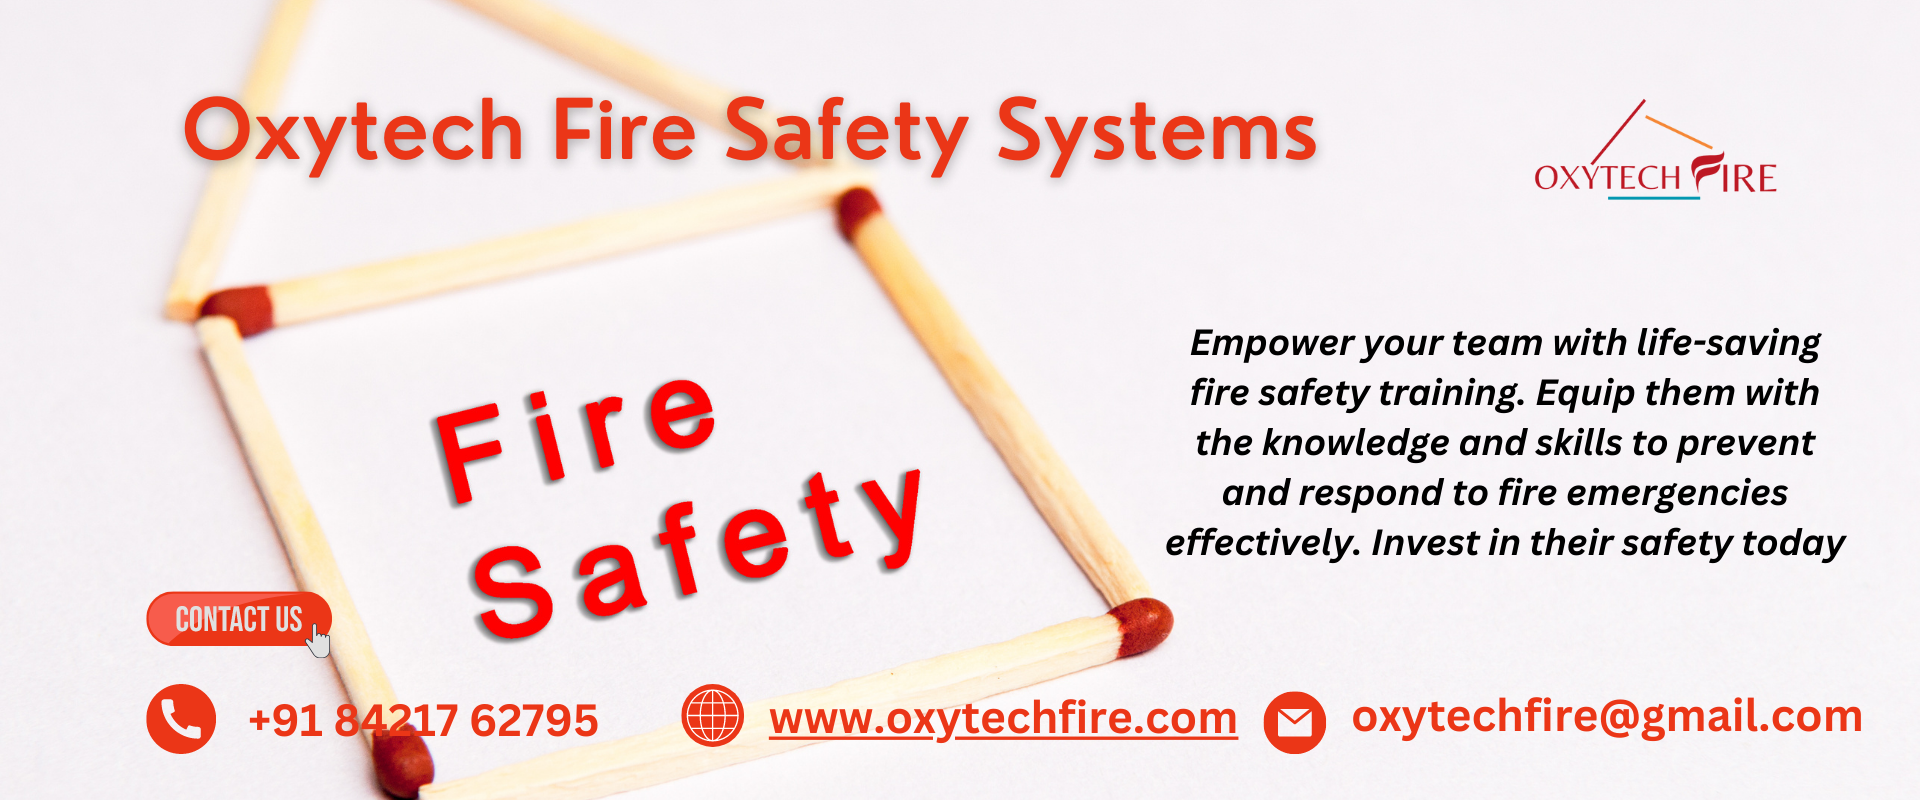 Fire Safety Training: Equipping Your Team with Life-Saving Skills